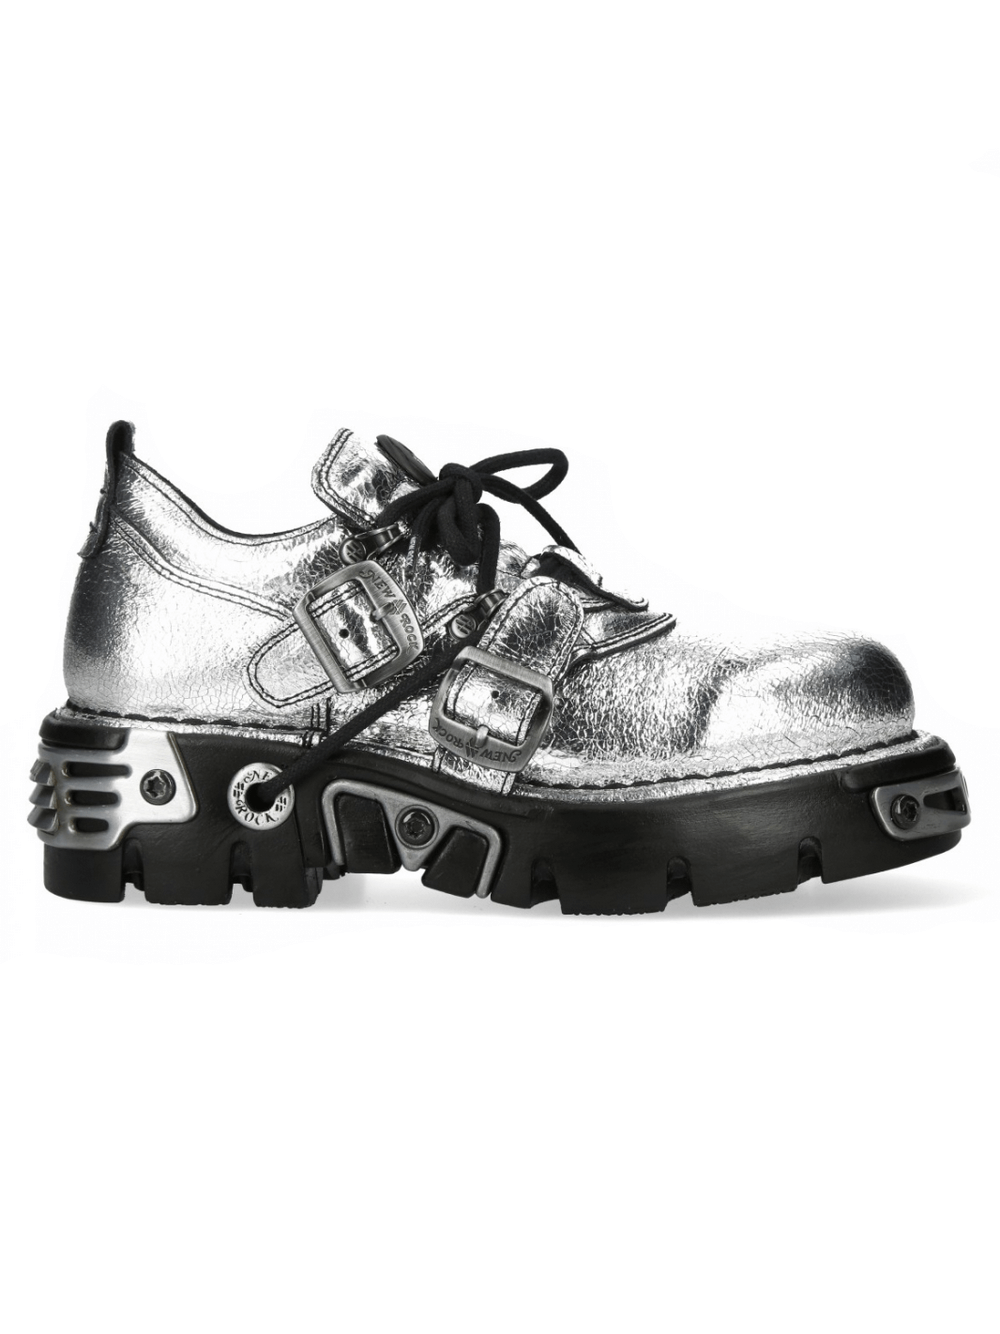 NEW ROCK Metallic Punk Rock Lace-Up Shoes with Buckles